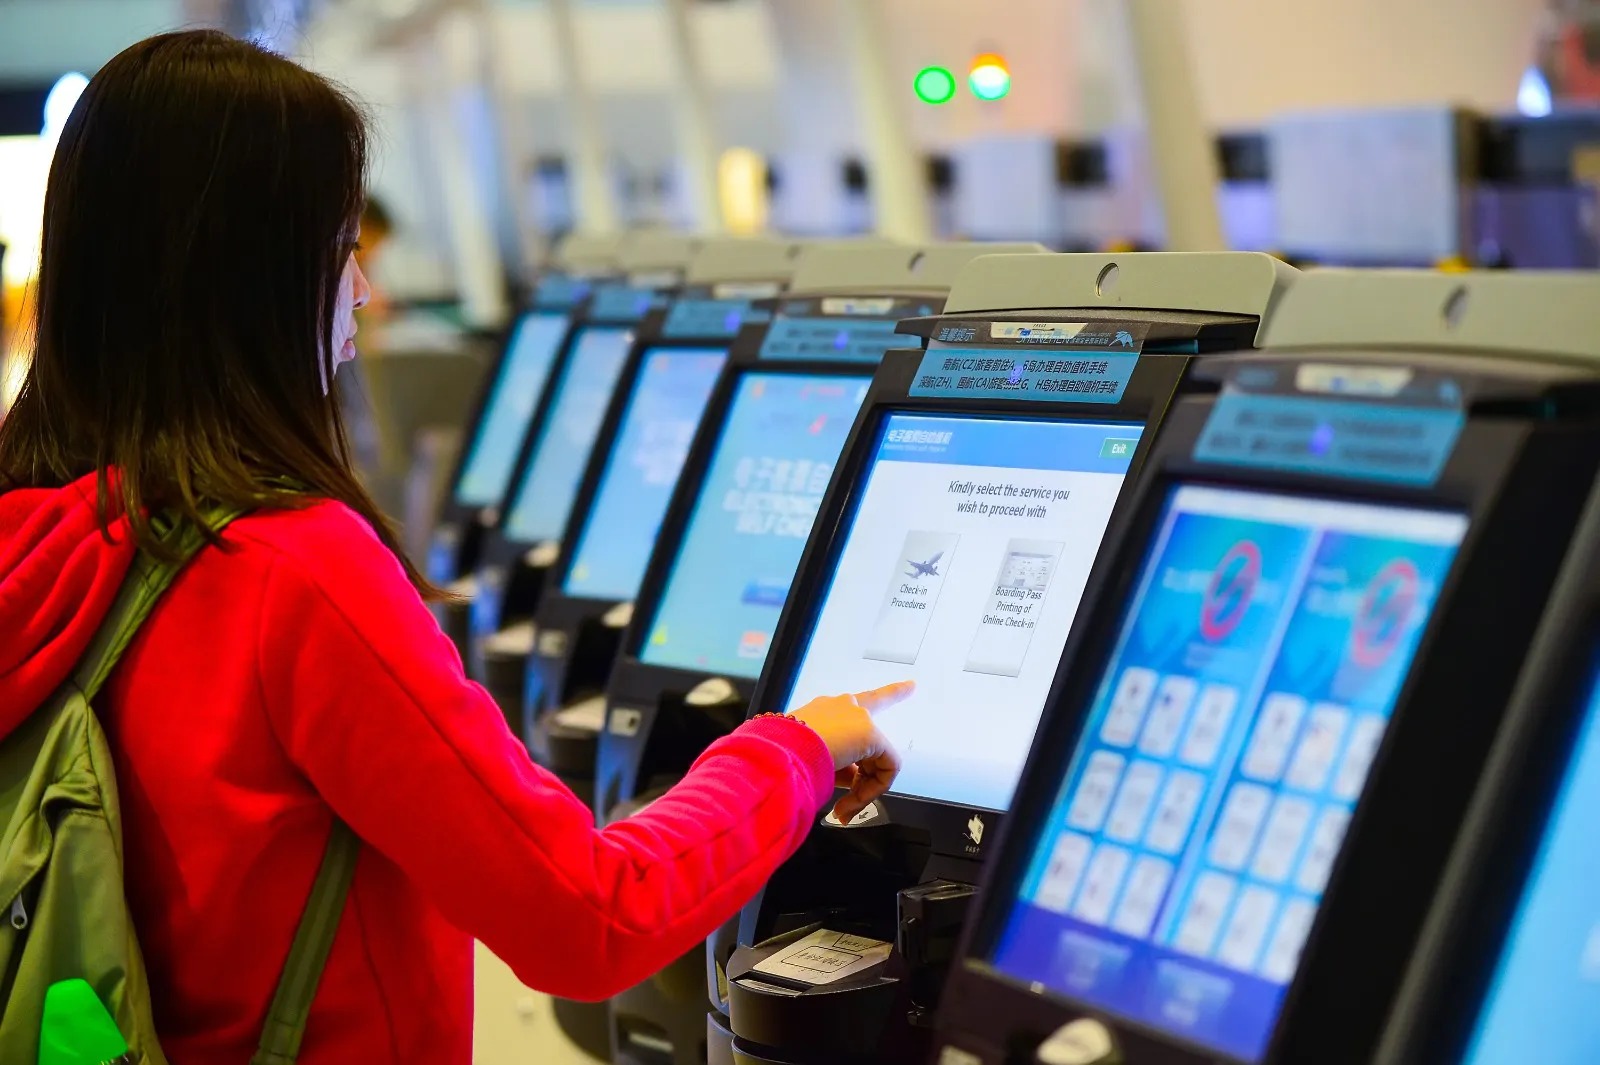 multimedia interactive information kiosk factory in airport